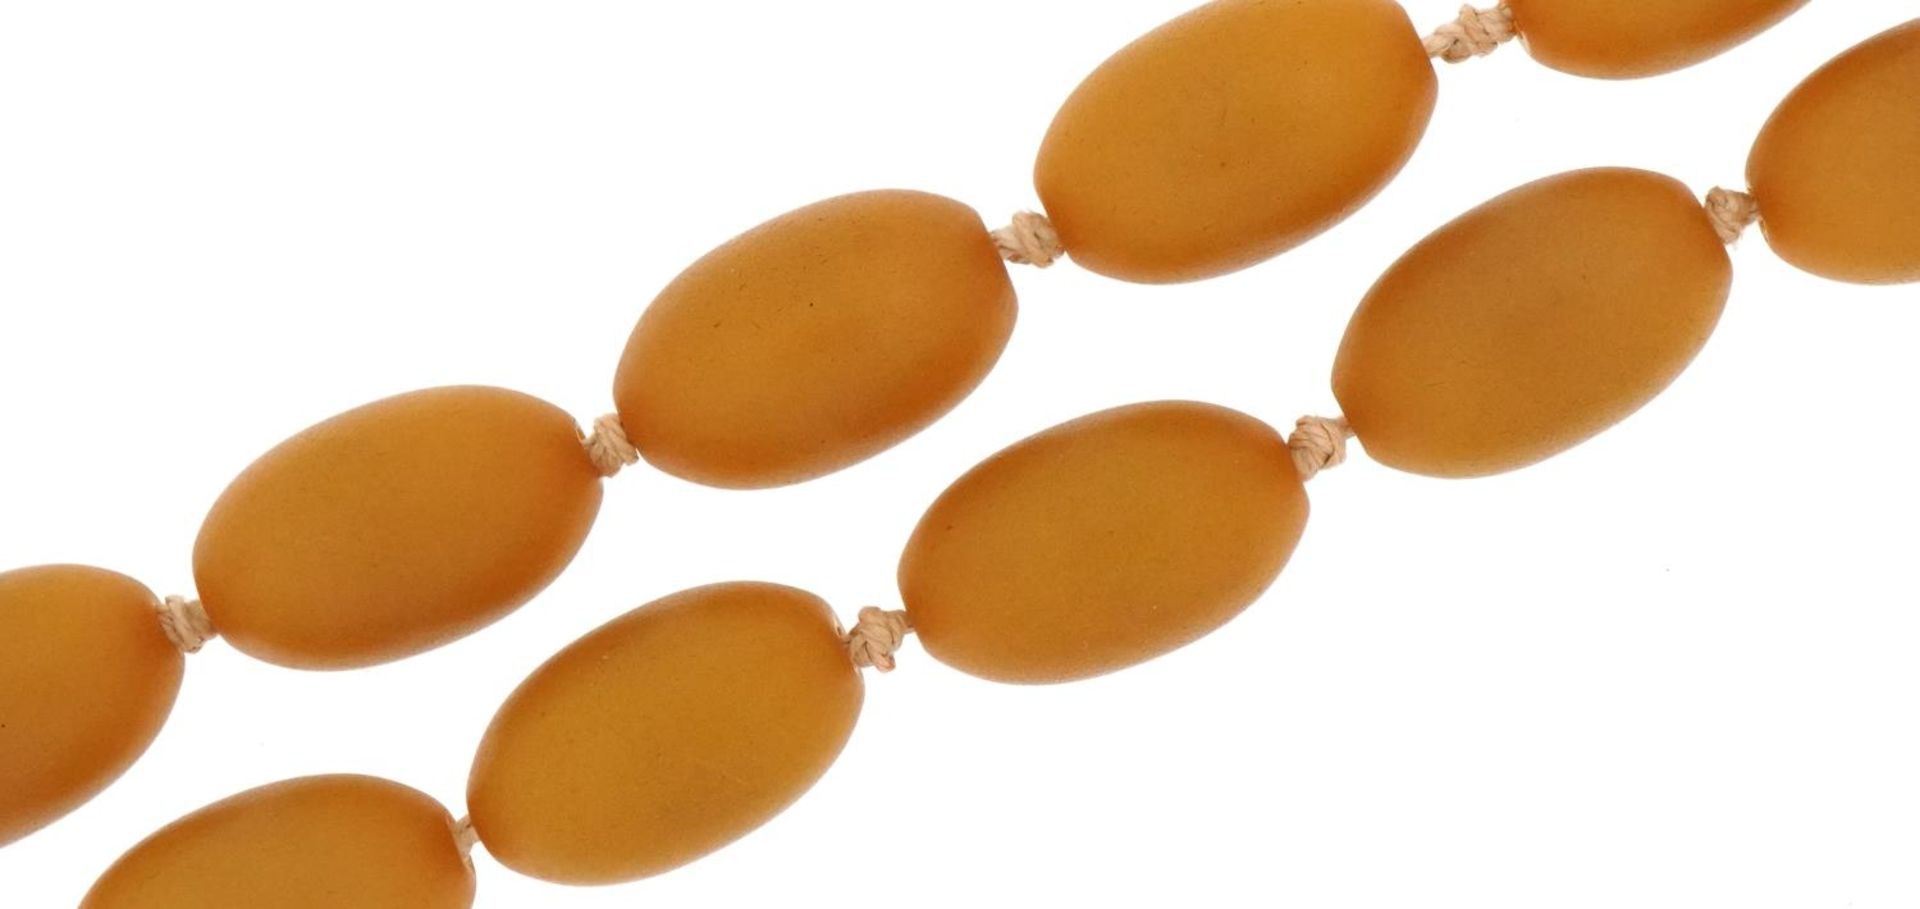 Vintage amber coloured bakelite bead necklace, 96cm in length, 118.5g - Image 2 of 2